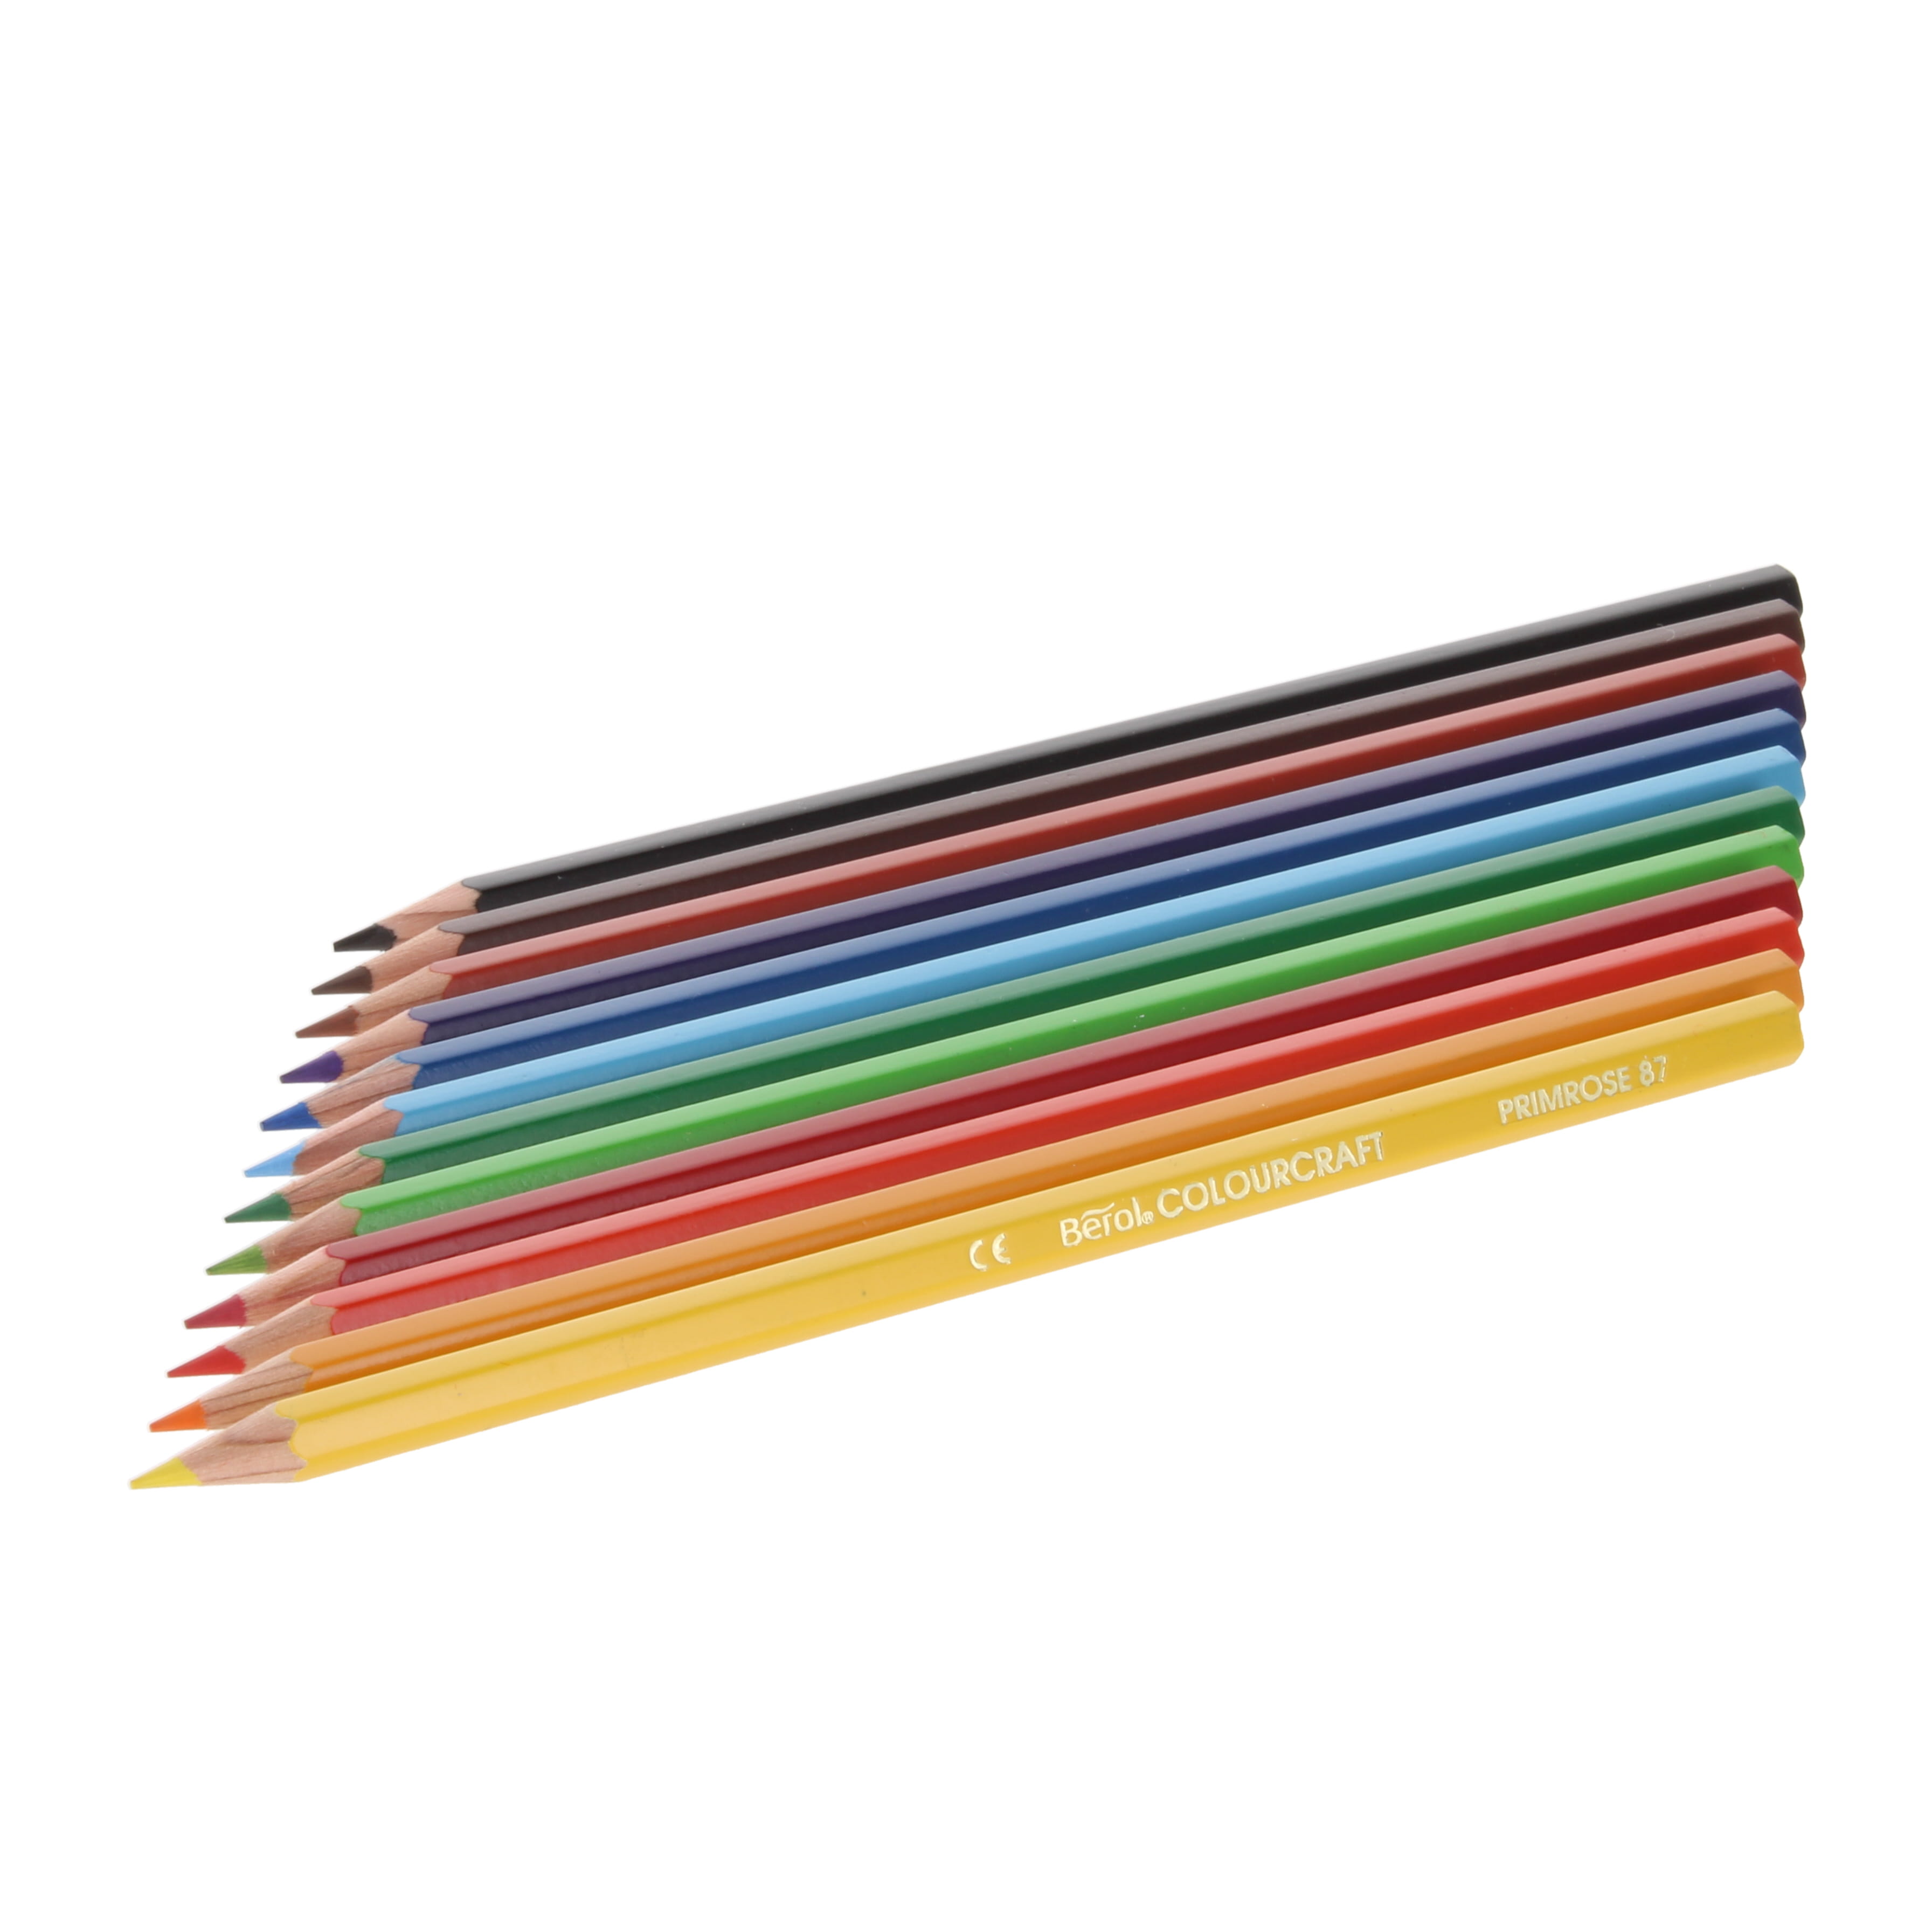 Berol Colourcraft Full Length Colouring Pencils Assorted - pack of 12 - STL10